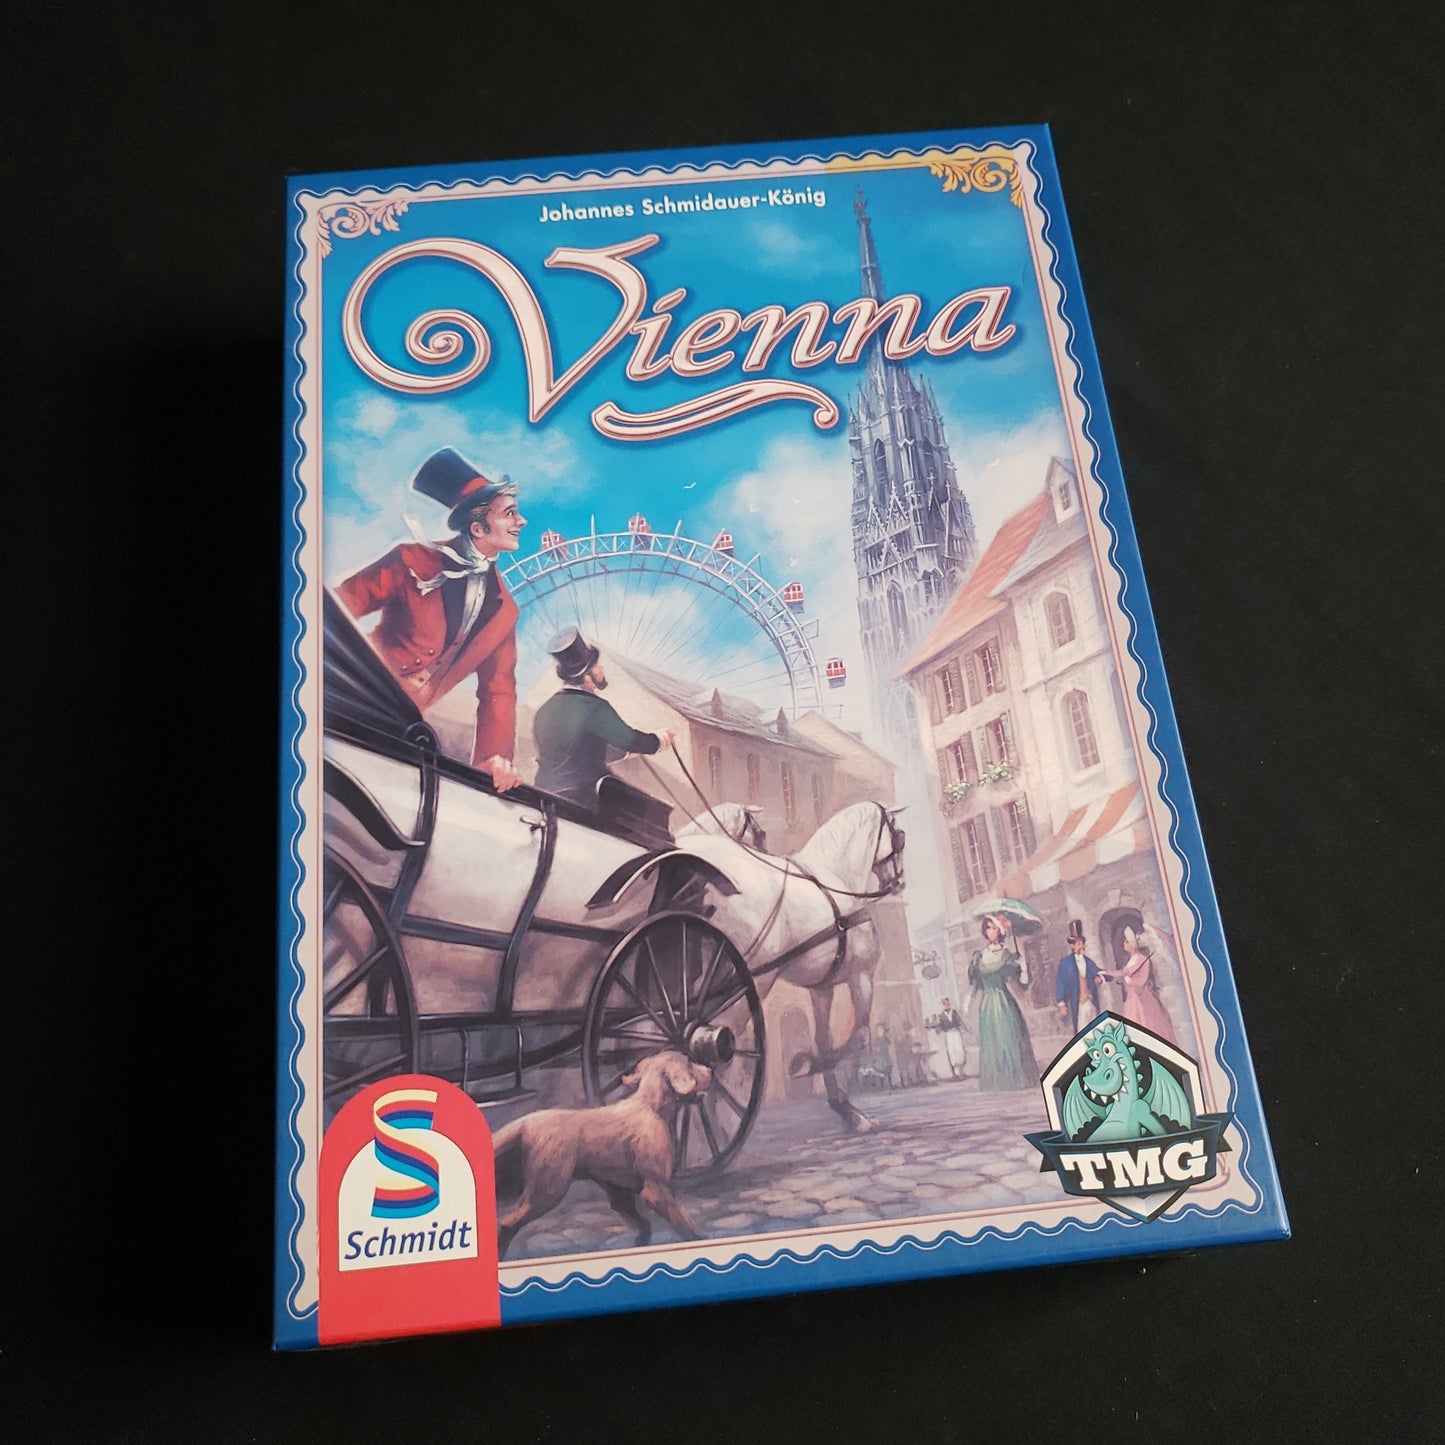 Image shows the front cover of the box of the Vienna board game